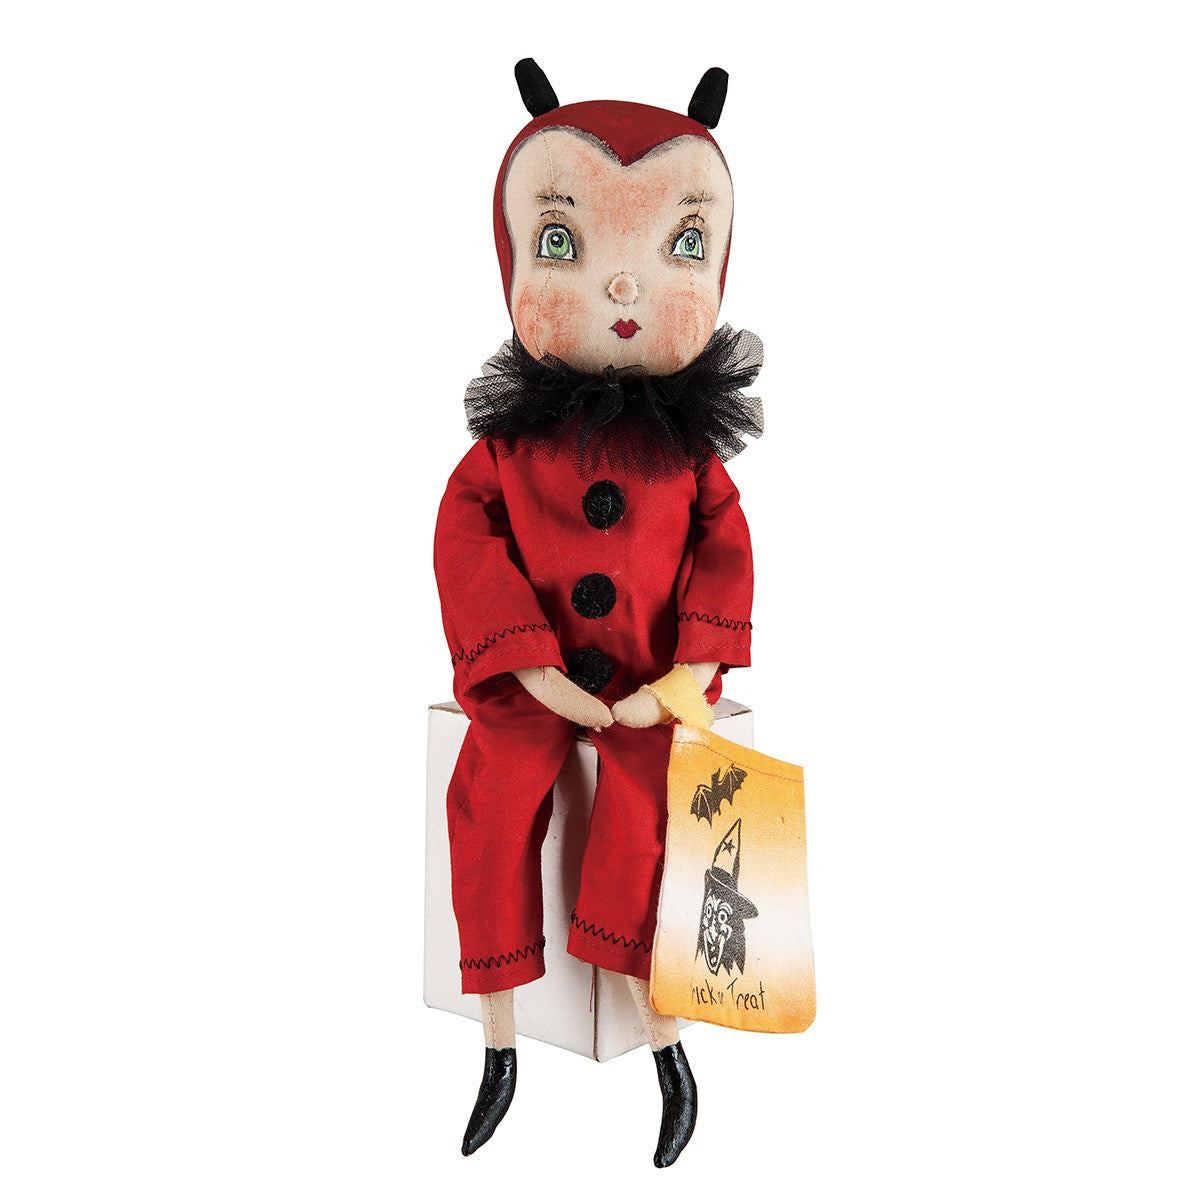 Danny the Devil Trick or Treater Cloth Doll. Joe Spencer Gathered Traditions Halloween Collection